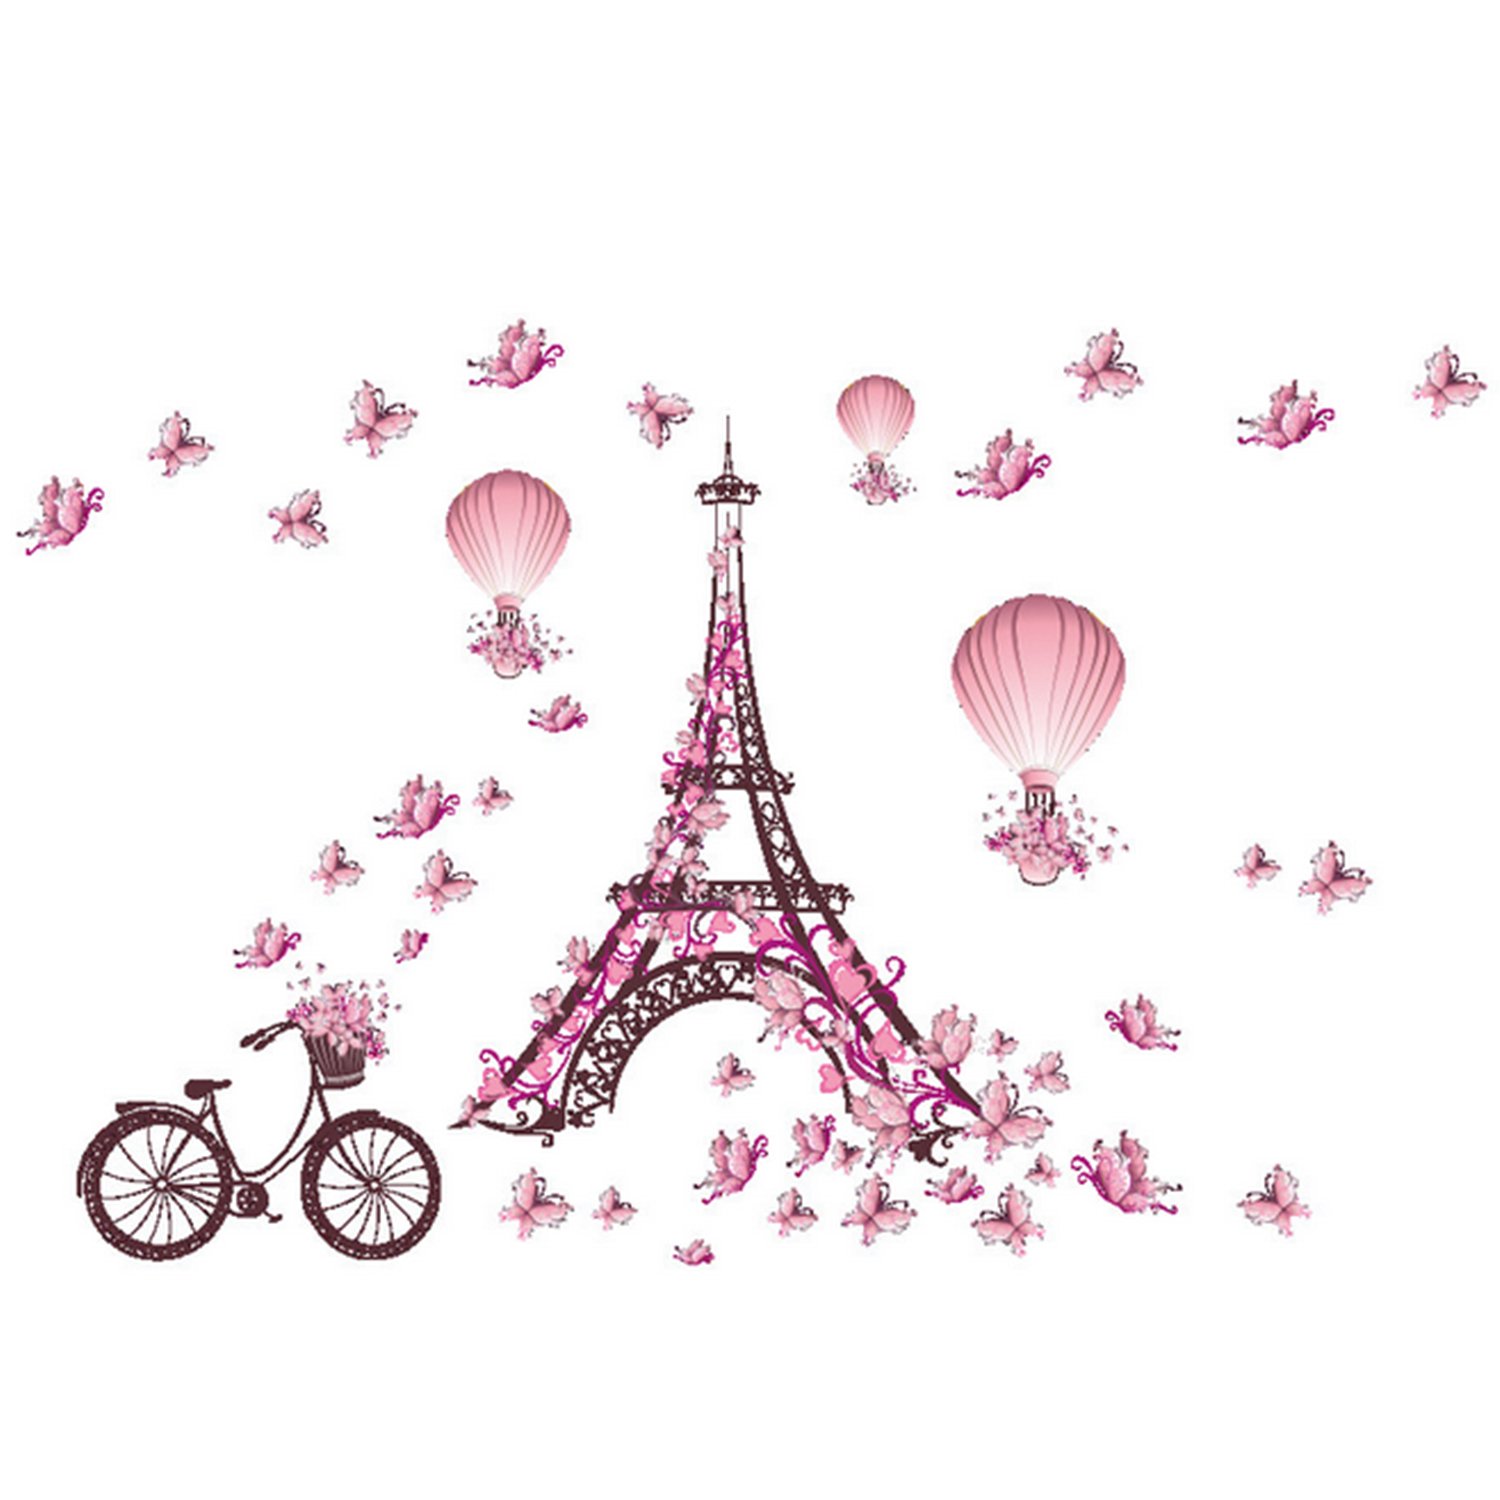 Book Cover Decor MI Romance Eiffel Tower Paris Butterfly Balloon Wall Decal Stickers Waterproof Removable Background Paris Decors Wallpaper Pink Wall Decals for Girls Bedroom Living Room Bathroom 39x26 inches Romance Paris